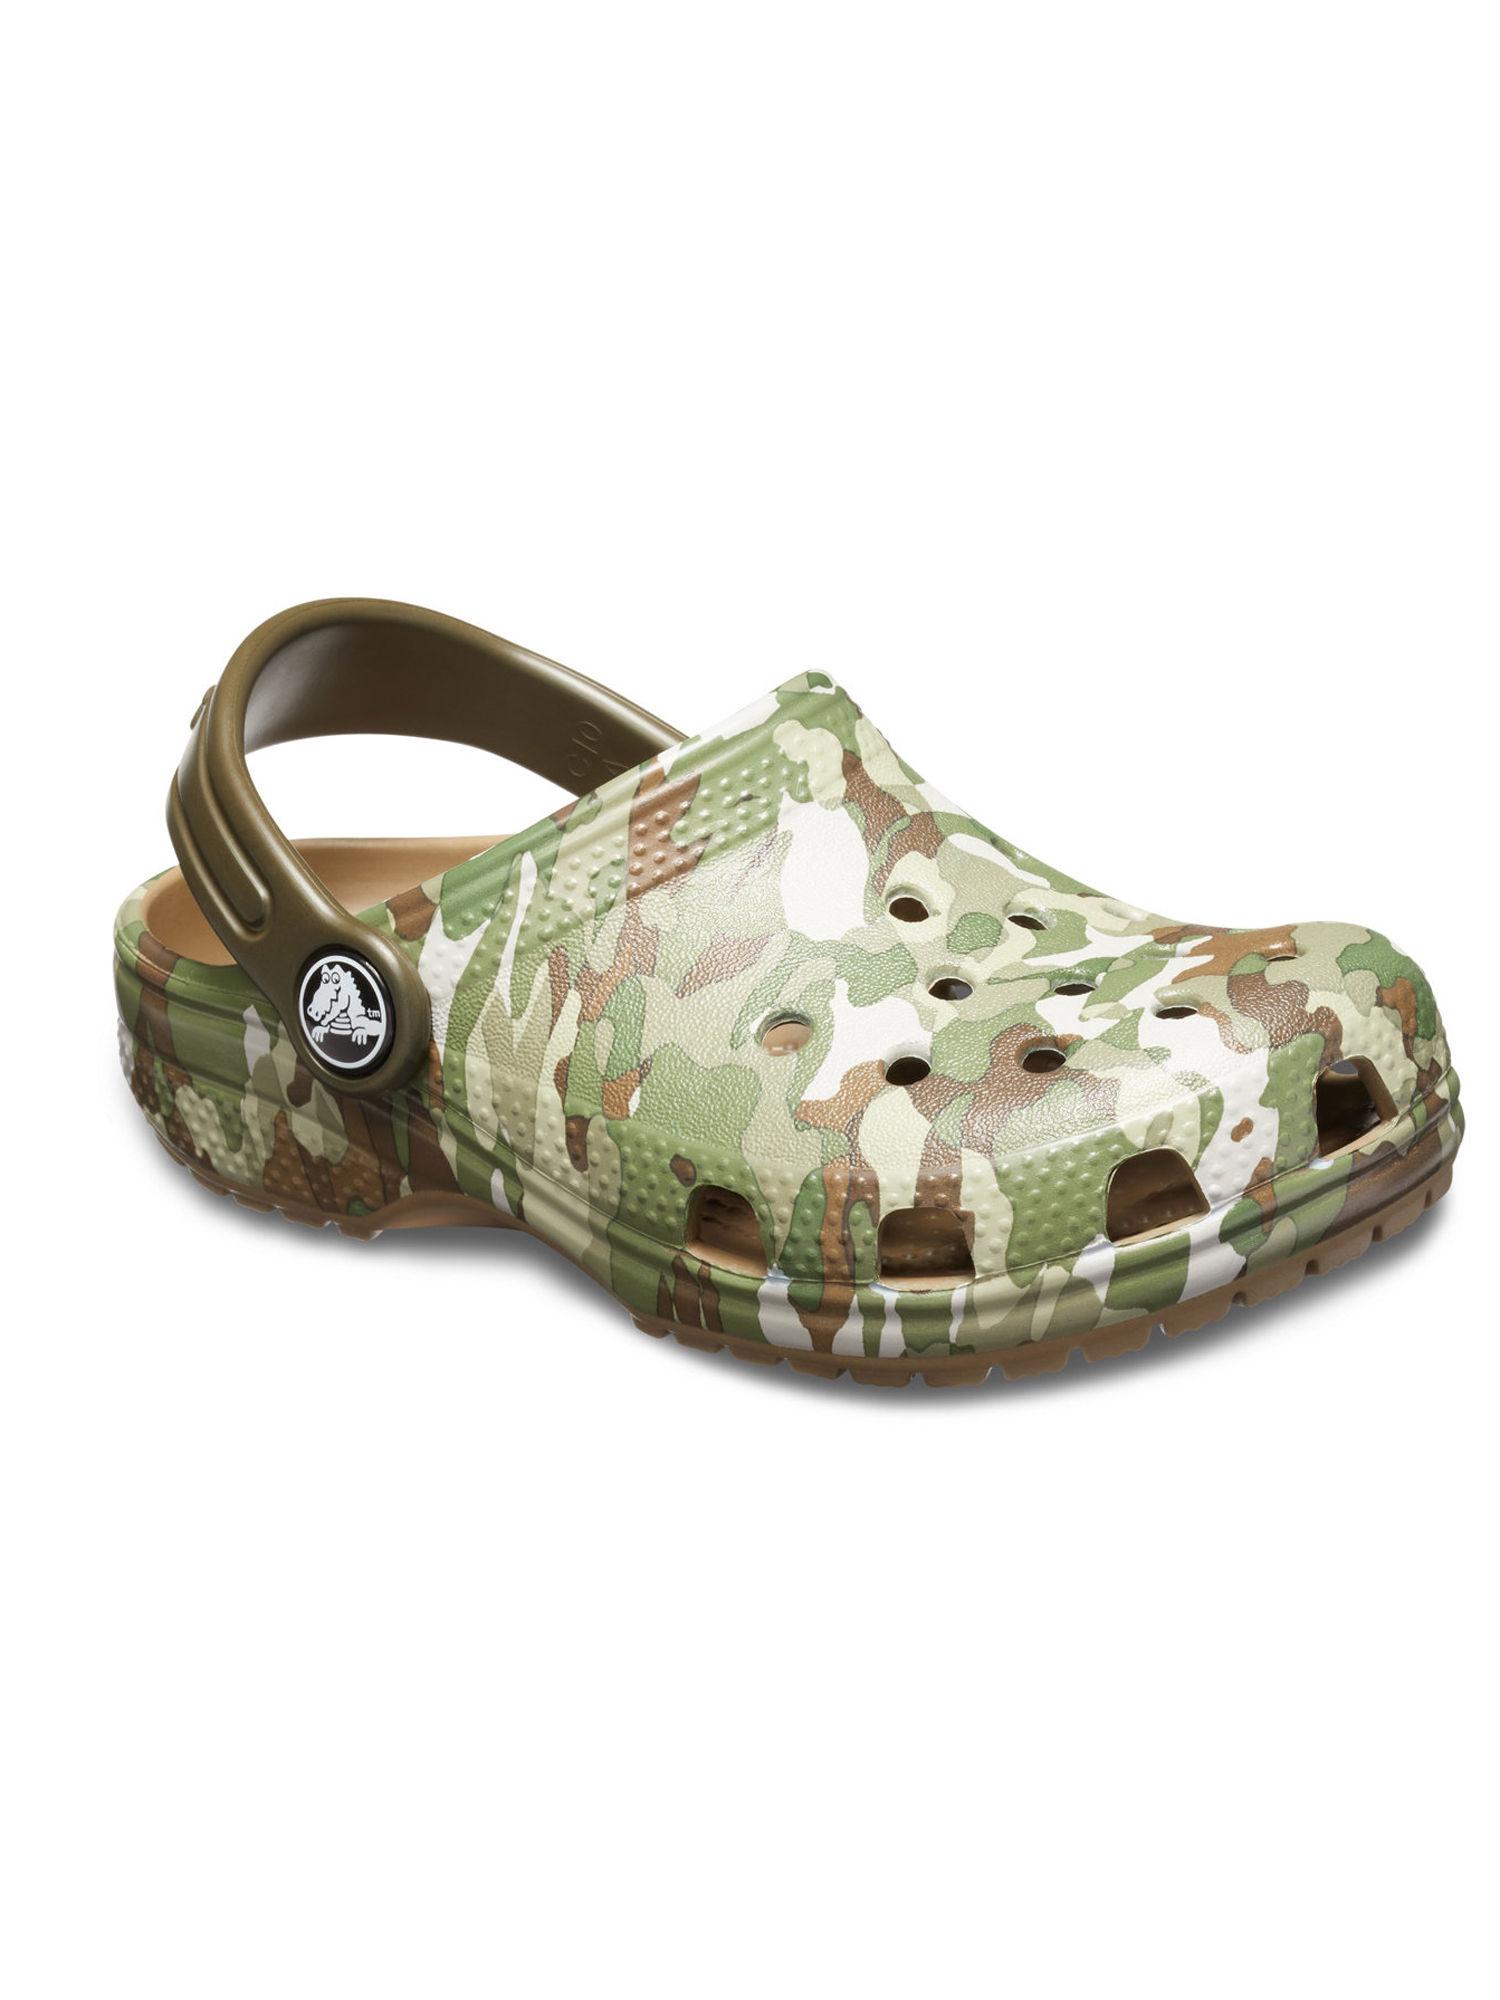 brown camouflage clogs